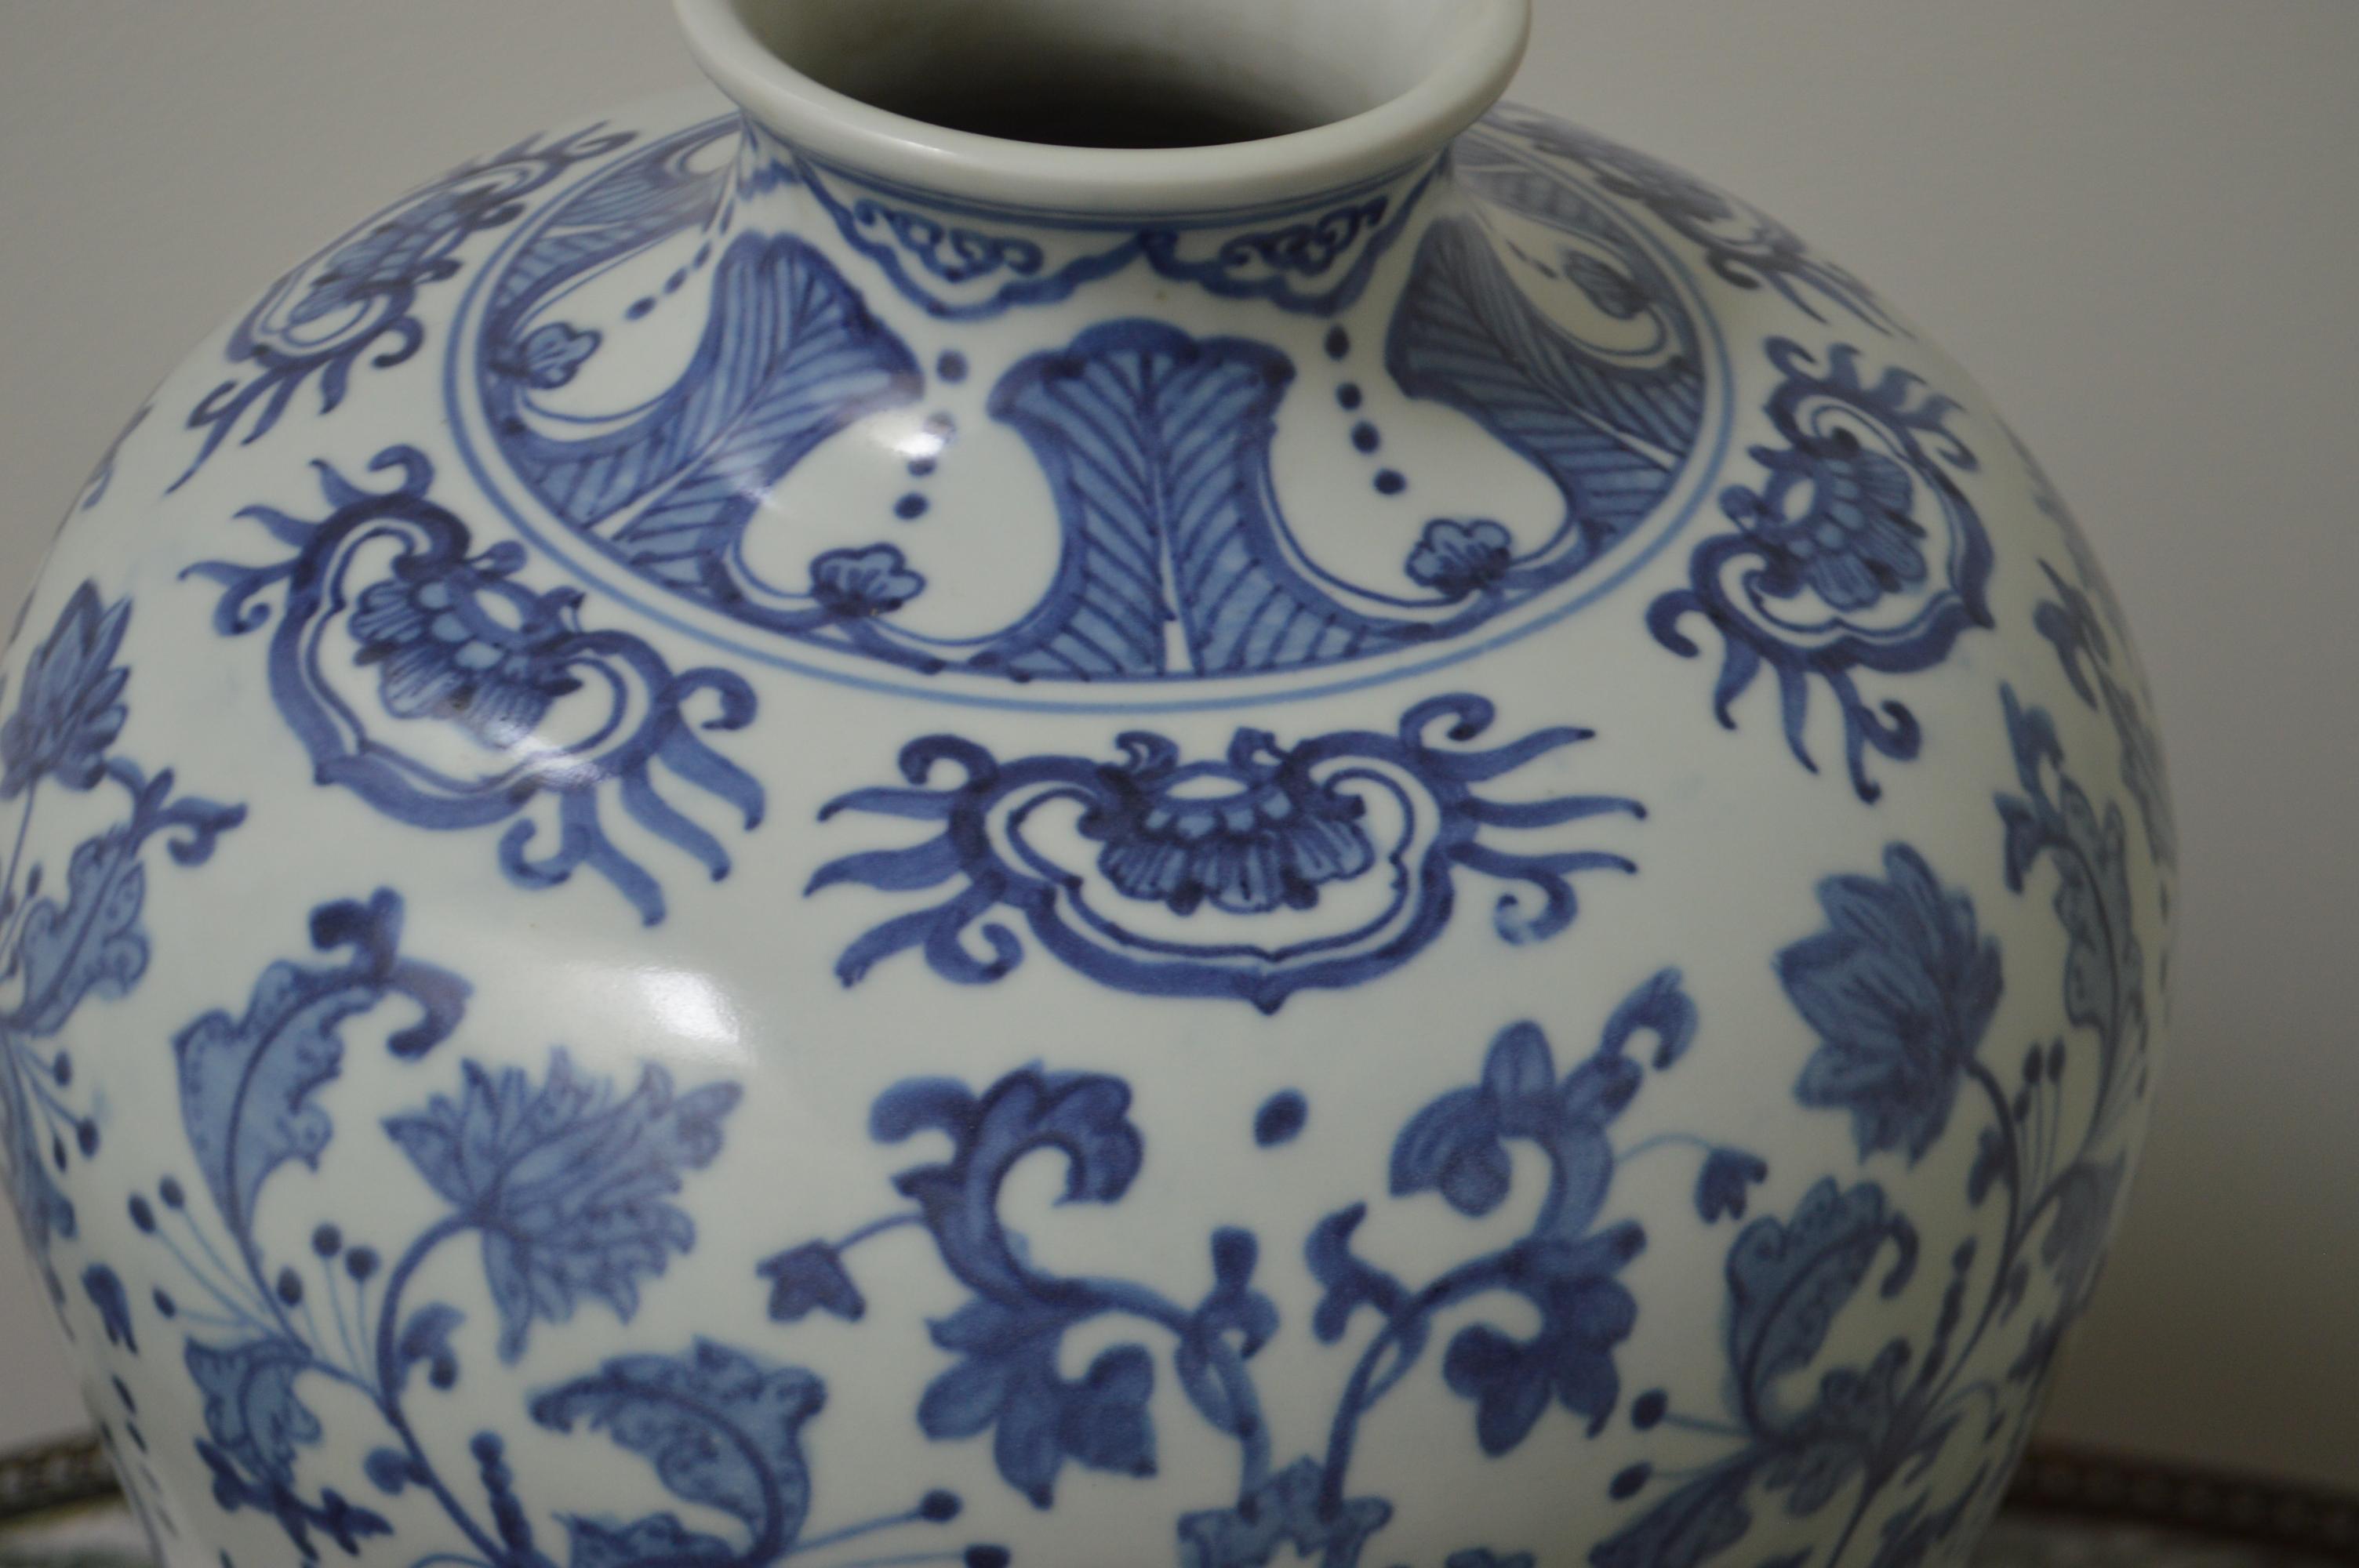 Highly decorative large floral blue and white porcelain Chinese vase. Apocryphal Quianlong at base. The floral design is in light and dark navy blue.
   